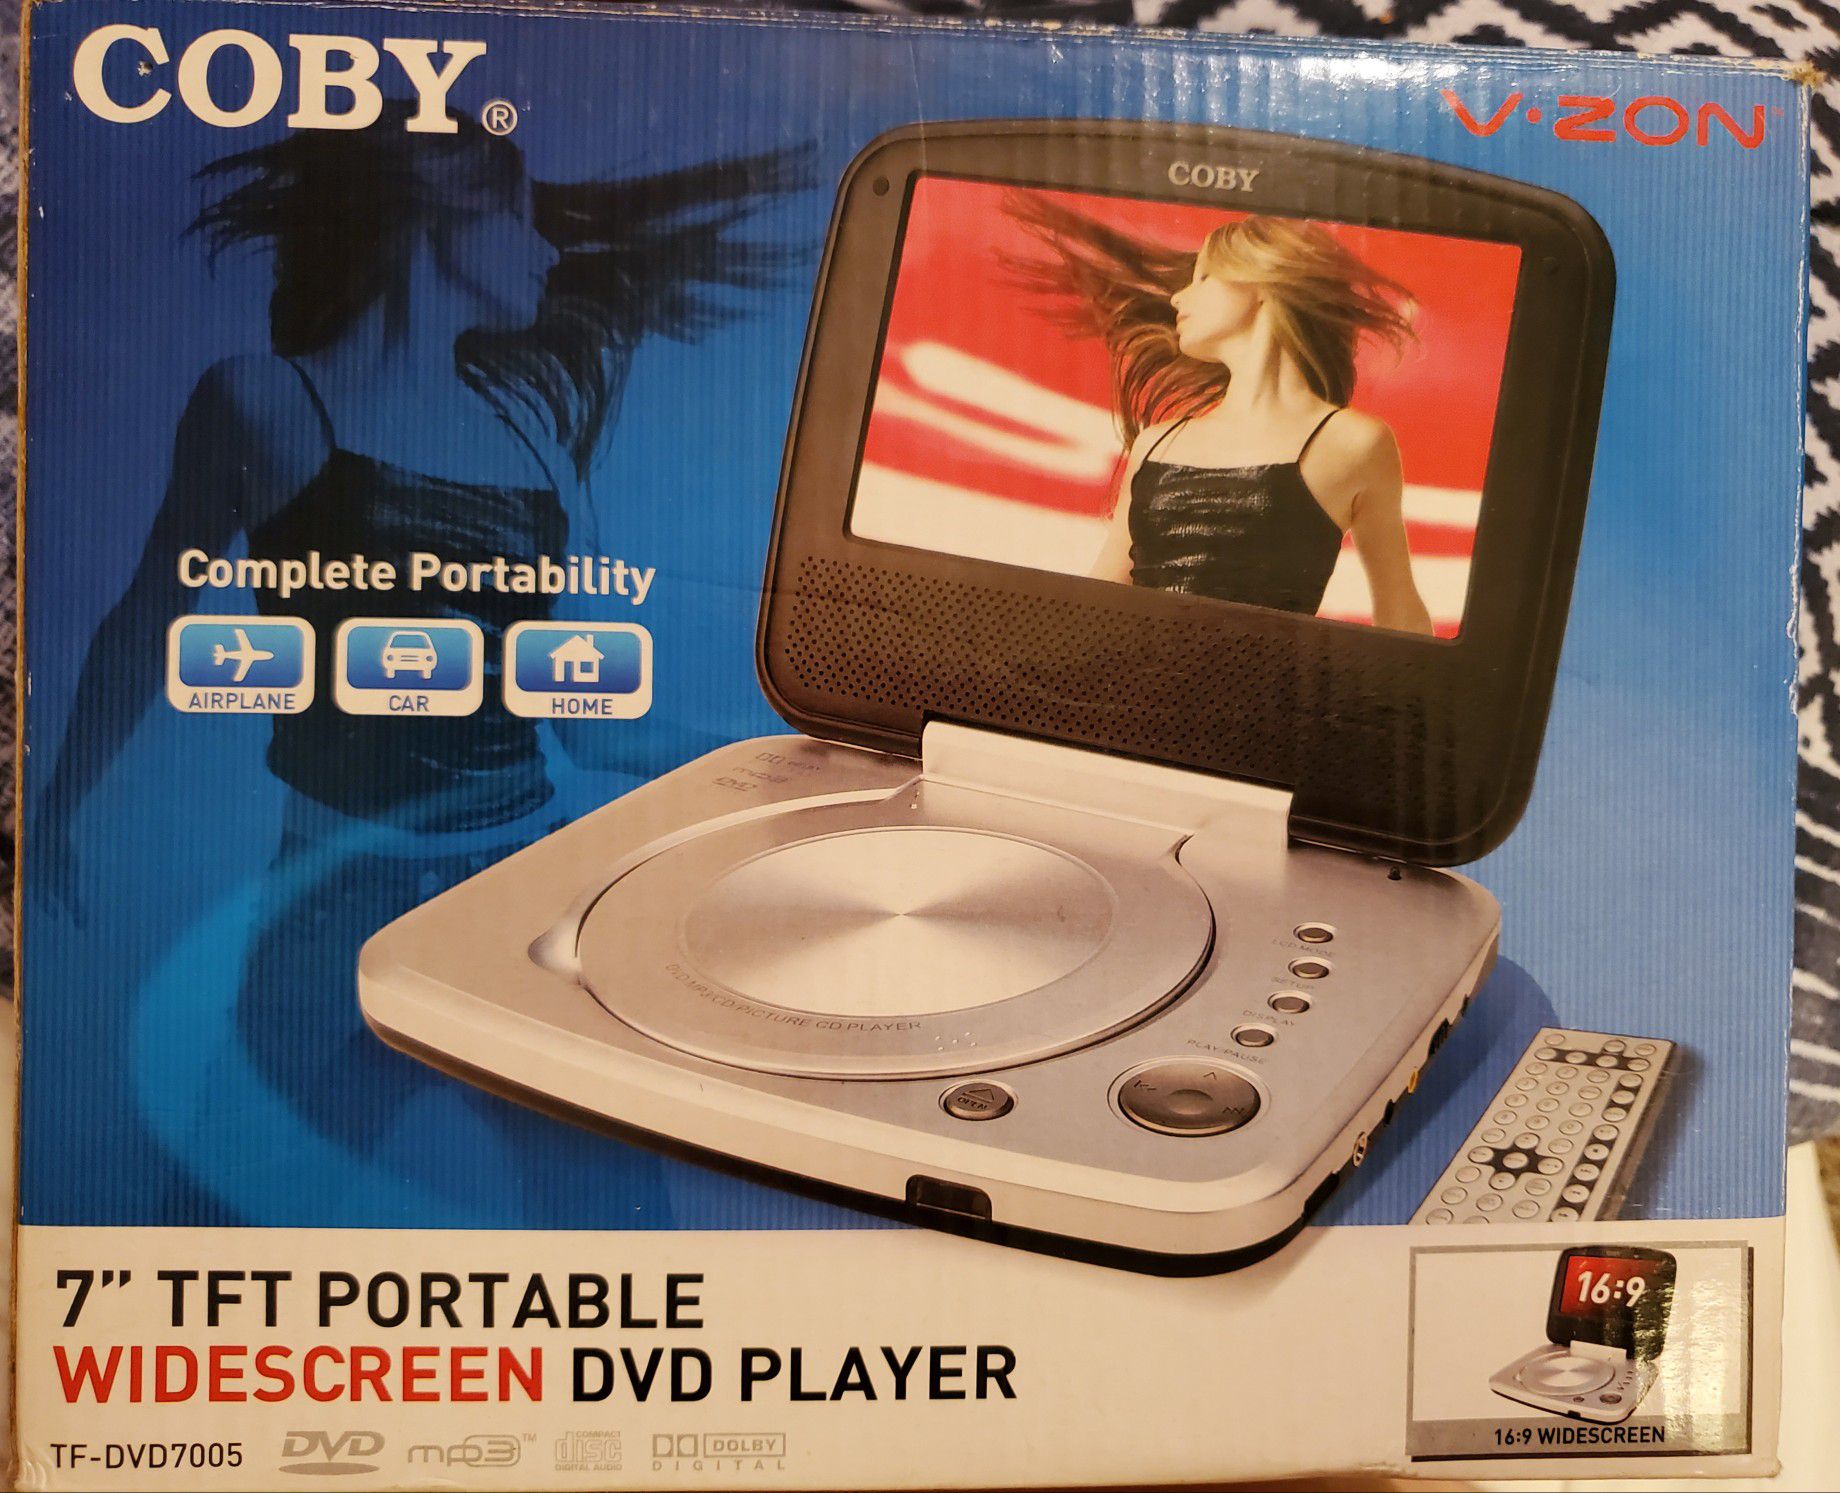 Colby 7" TFT Portable Wide-screen DVD Player 16:9 Widescreen